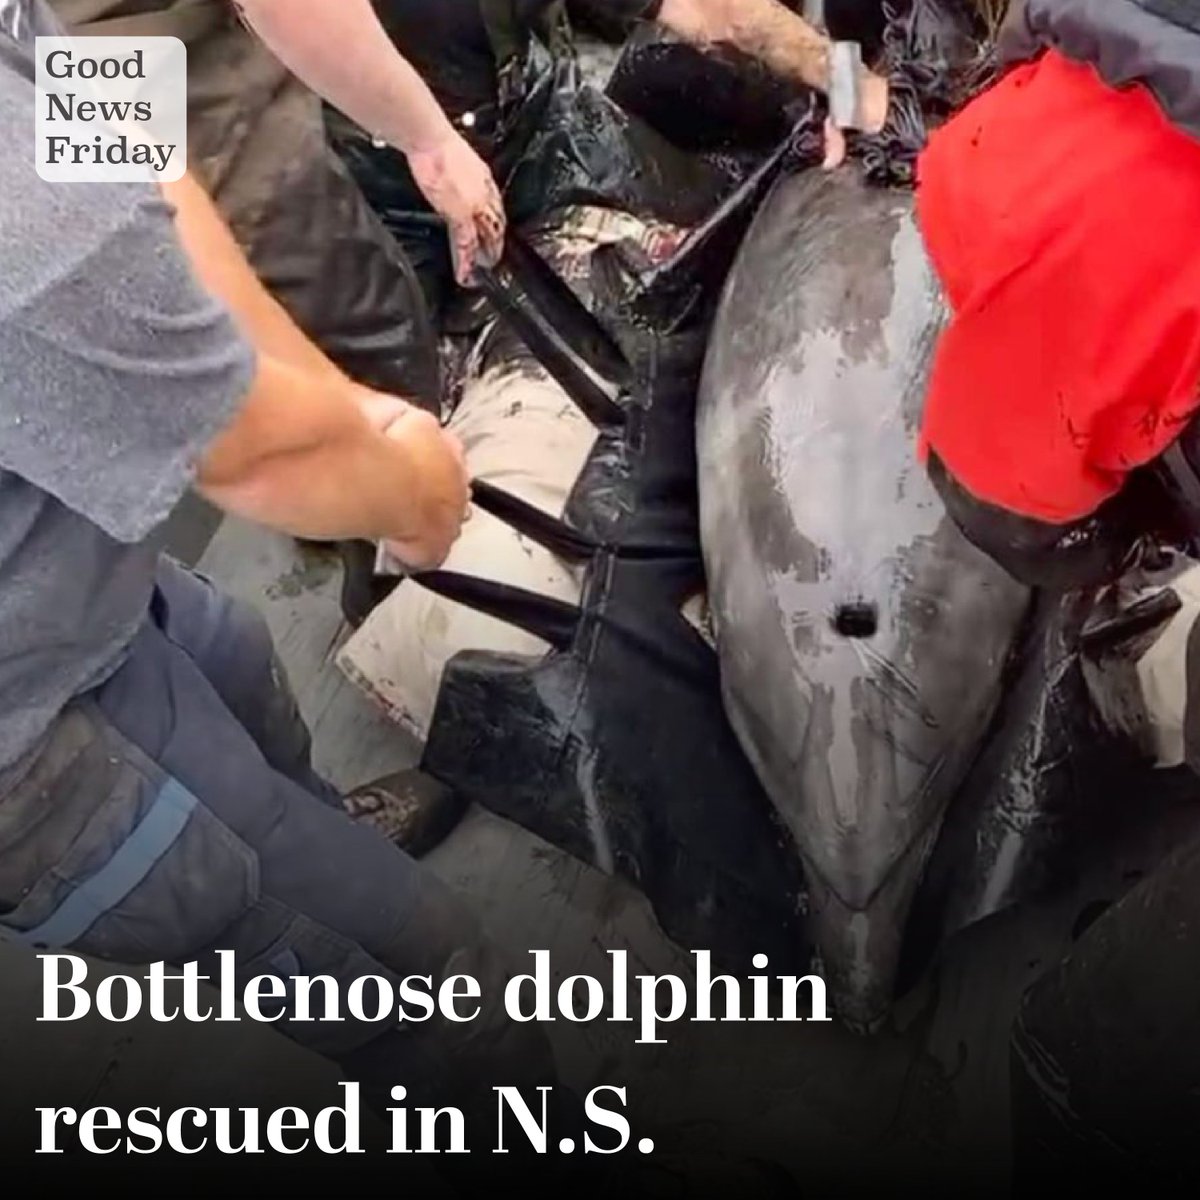 Community members and staff from the Marine Animal Response Society & DFO rescued a bottlenose dolphin that had become stranded in the shallow ocean mudflats. Thanks to their efforts, the dolphin was released safely back into the deeper waters of St. Margaret’s Bay, Nova Scotia.